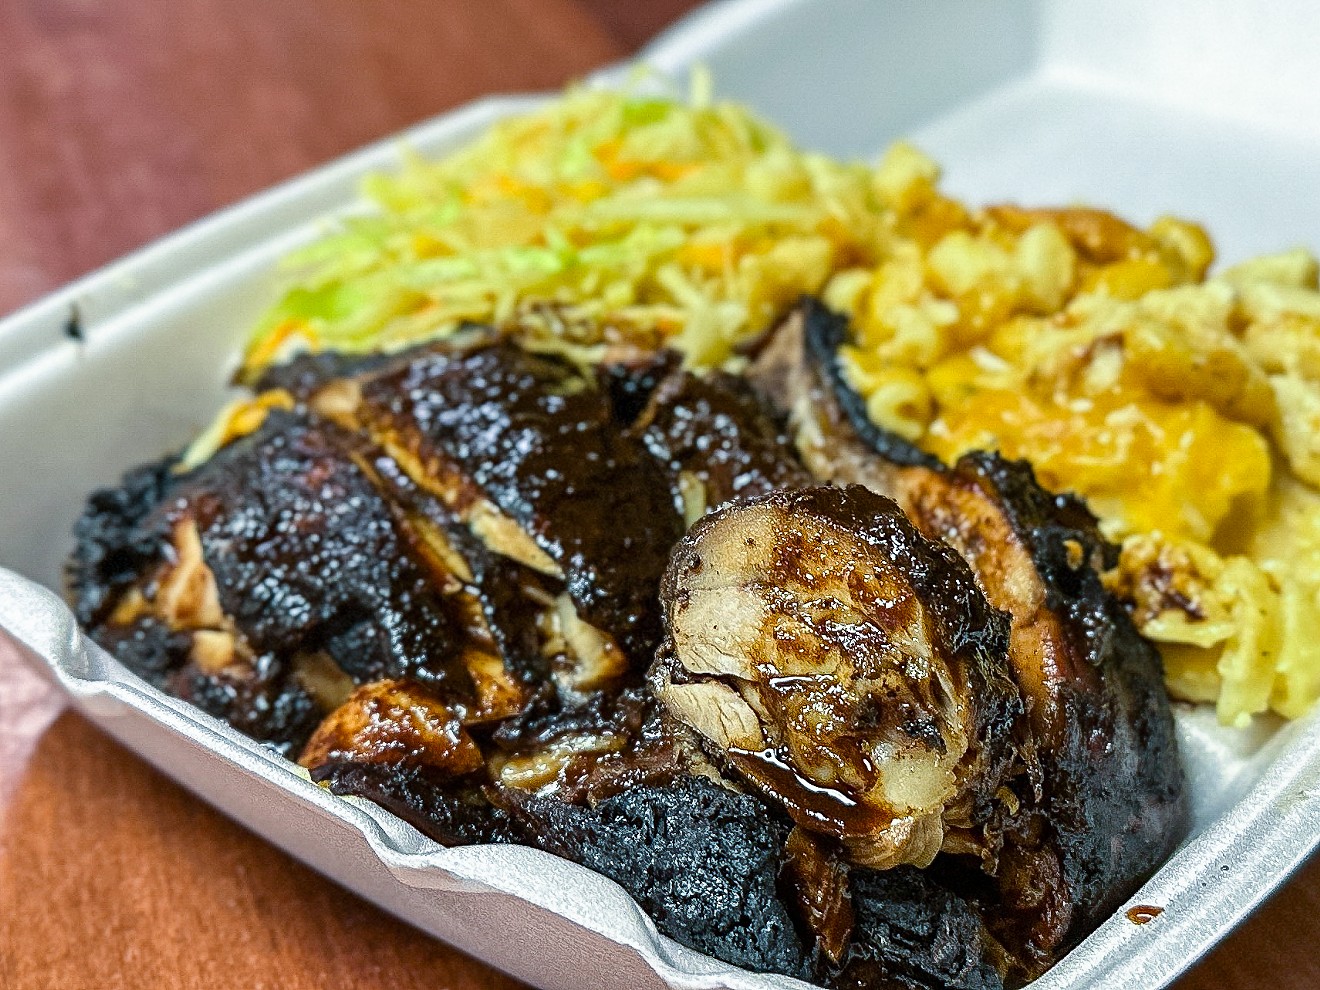 Reggae Wings & Tings is an unpretentious spot in Mesquite offering up decent Jamaican/American cuisine such as jerk chicken